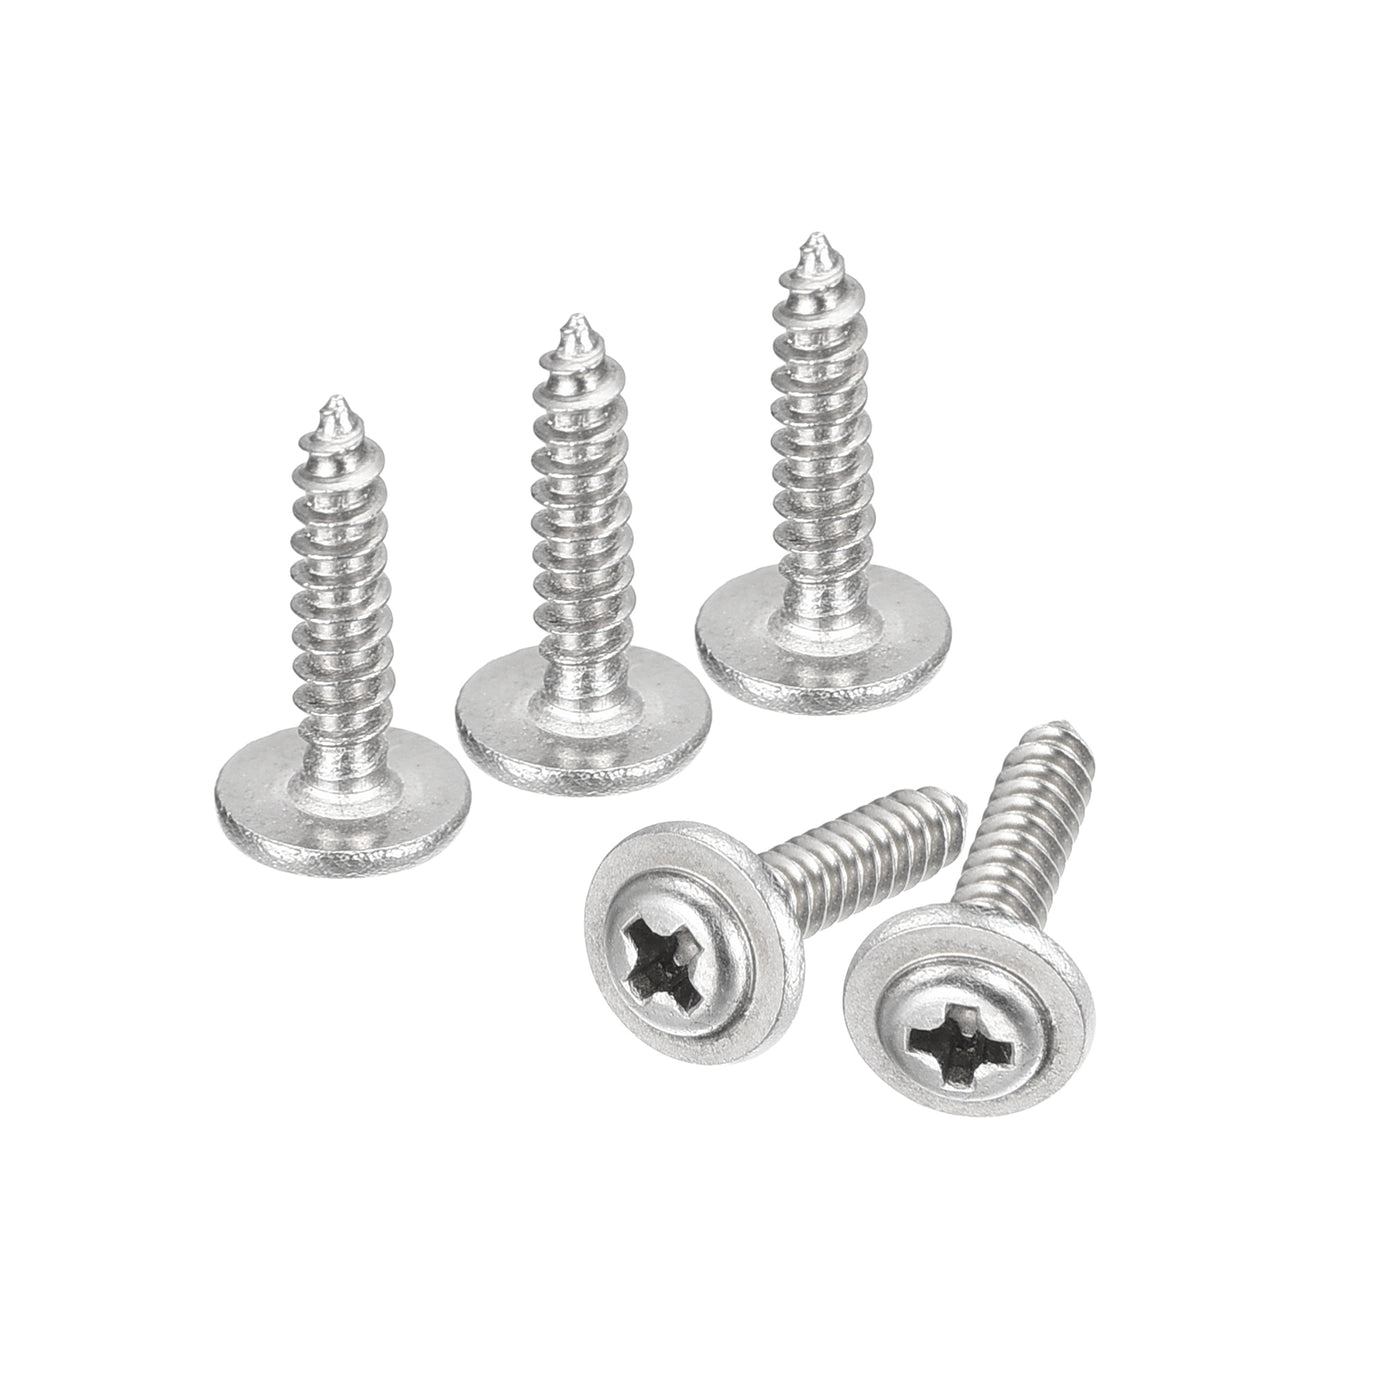 uxcell Uxcell ST2x10mm Phillips Pan Head Self-tapping Screw with Washer, 100pcs - 304 Stainless Steel Wood Screw Full Thread (Silver)